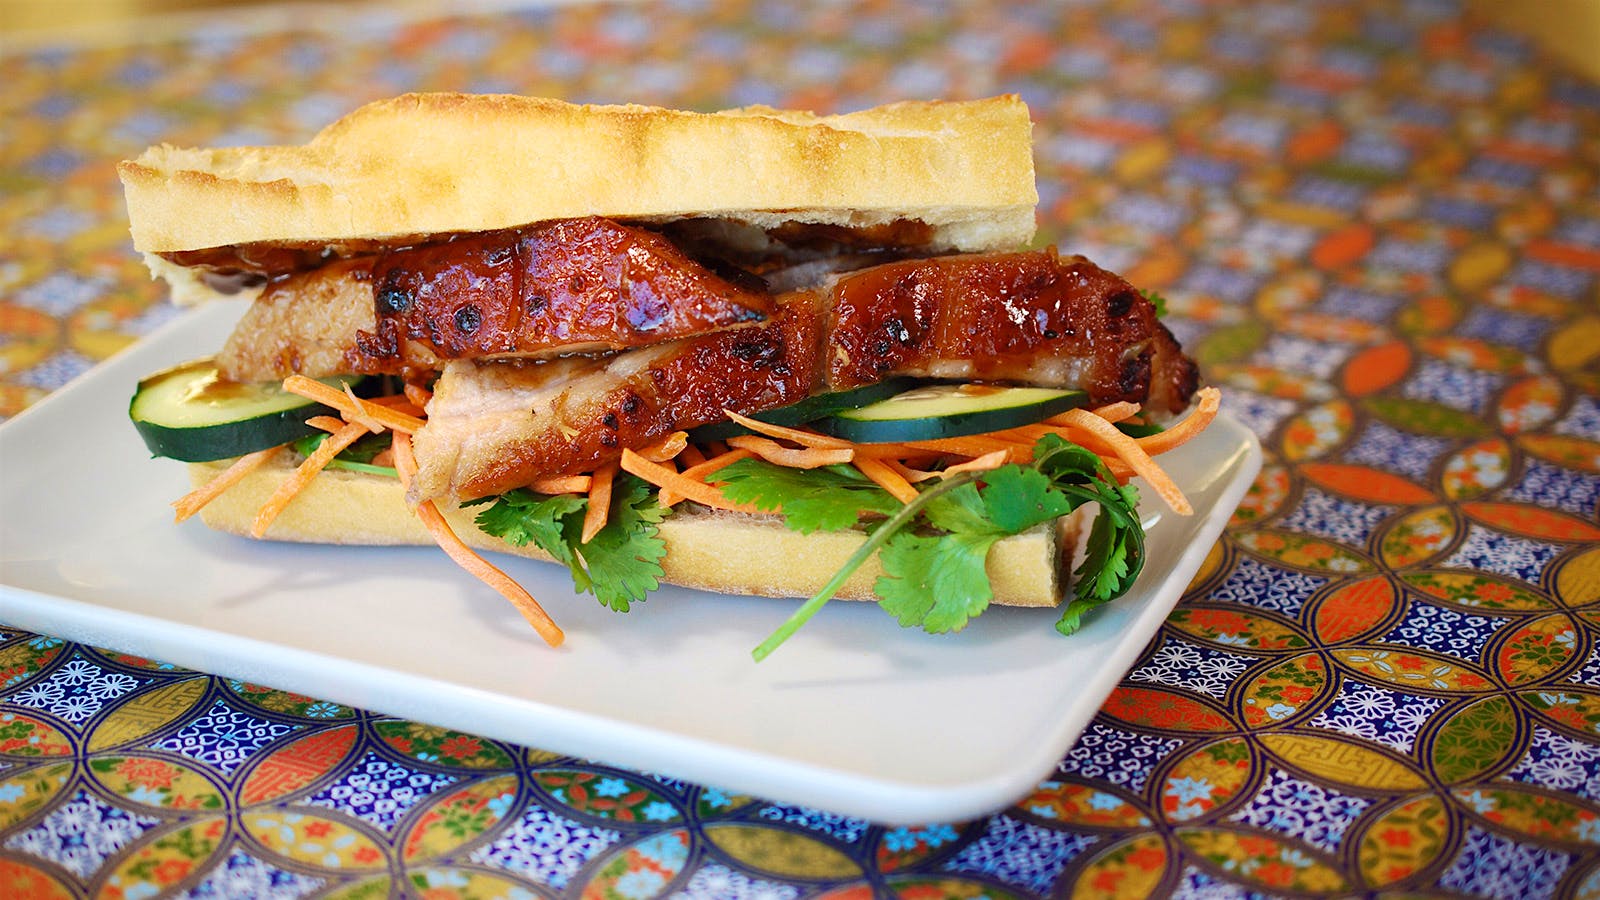 8 & $20: Pork Belly Bánh Mì and an Aromatic White